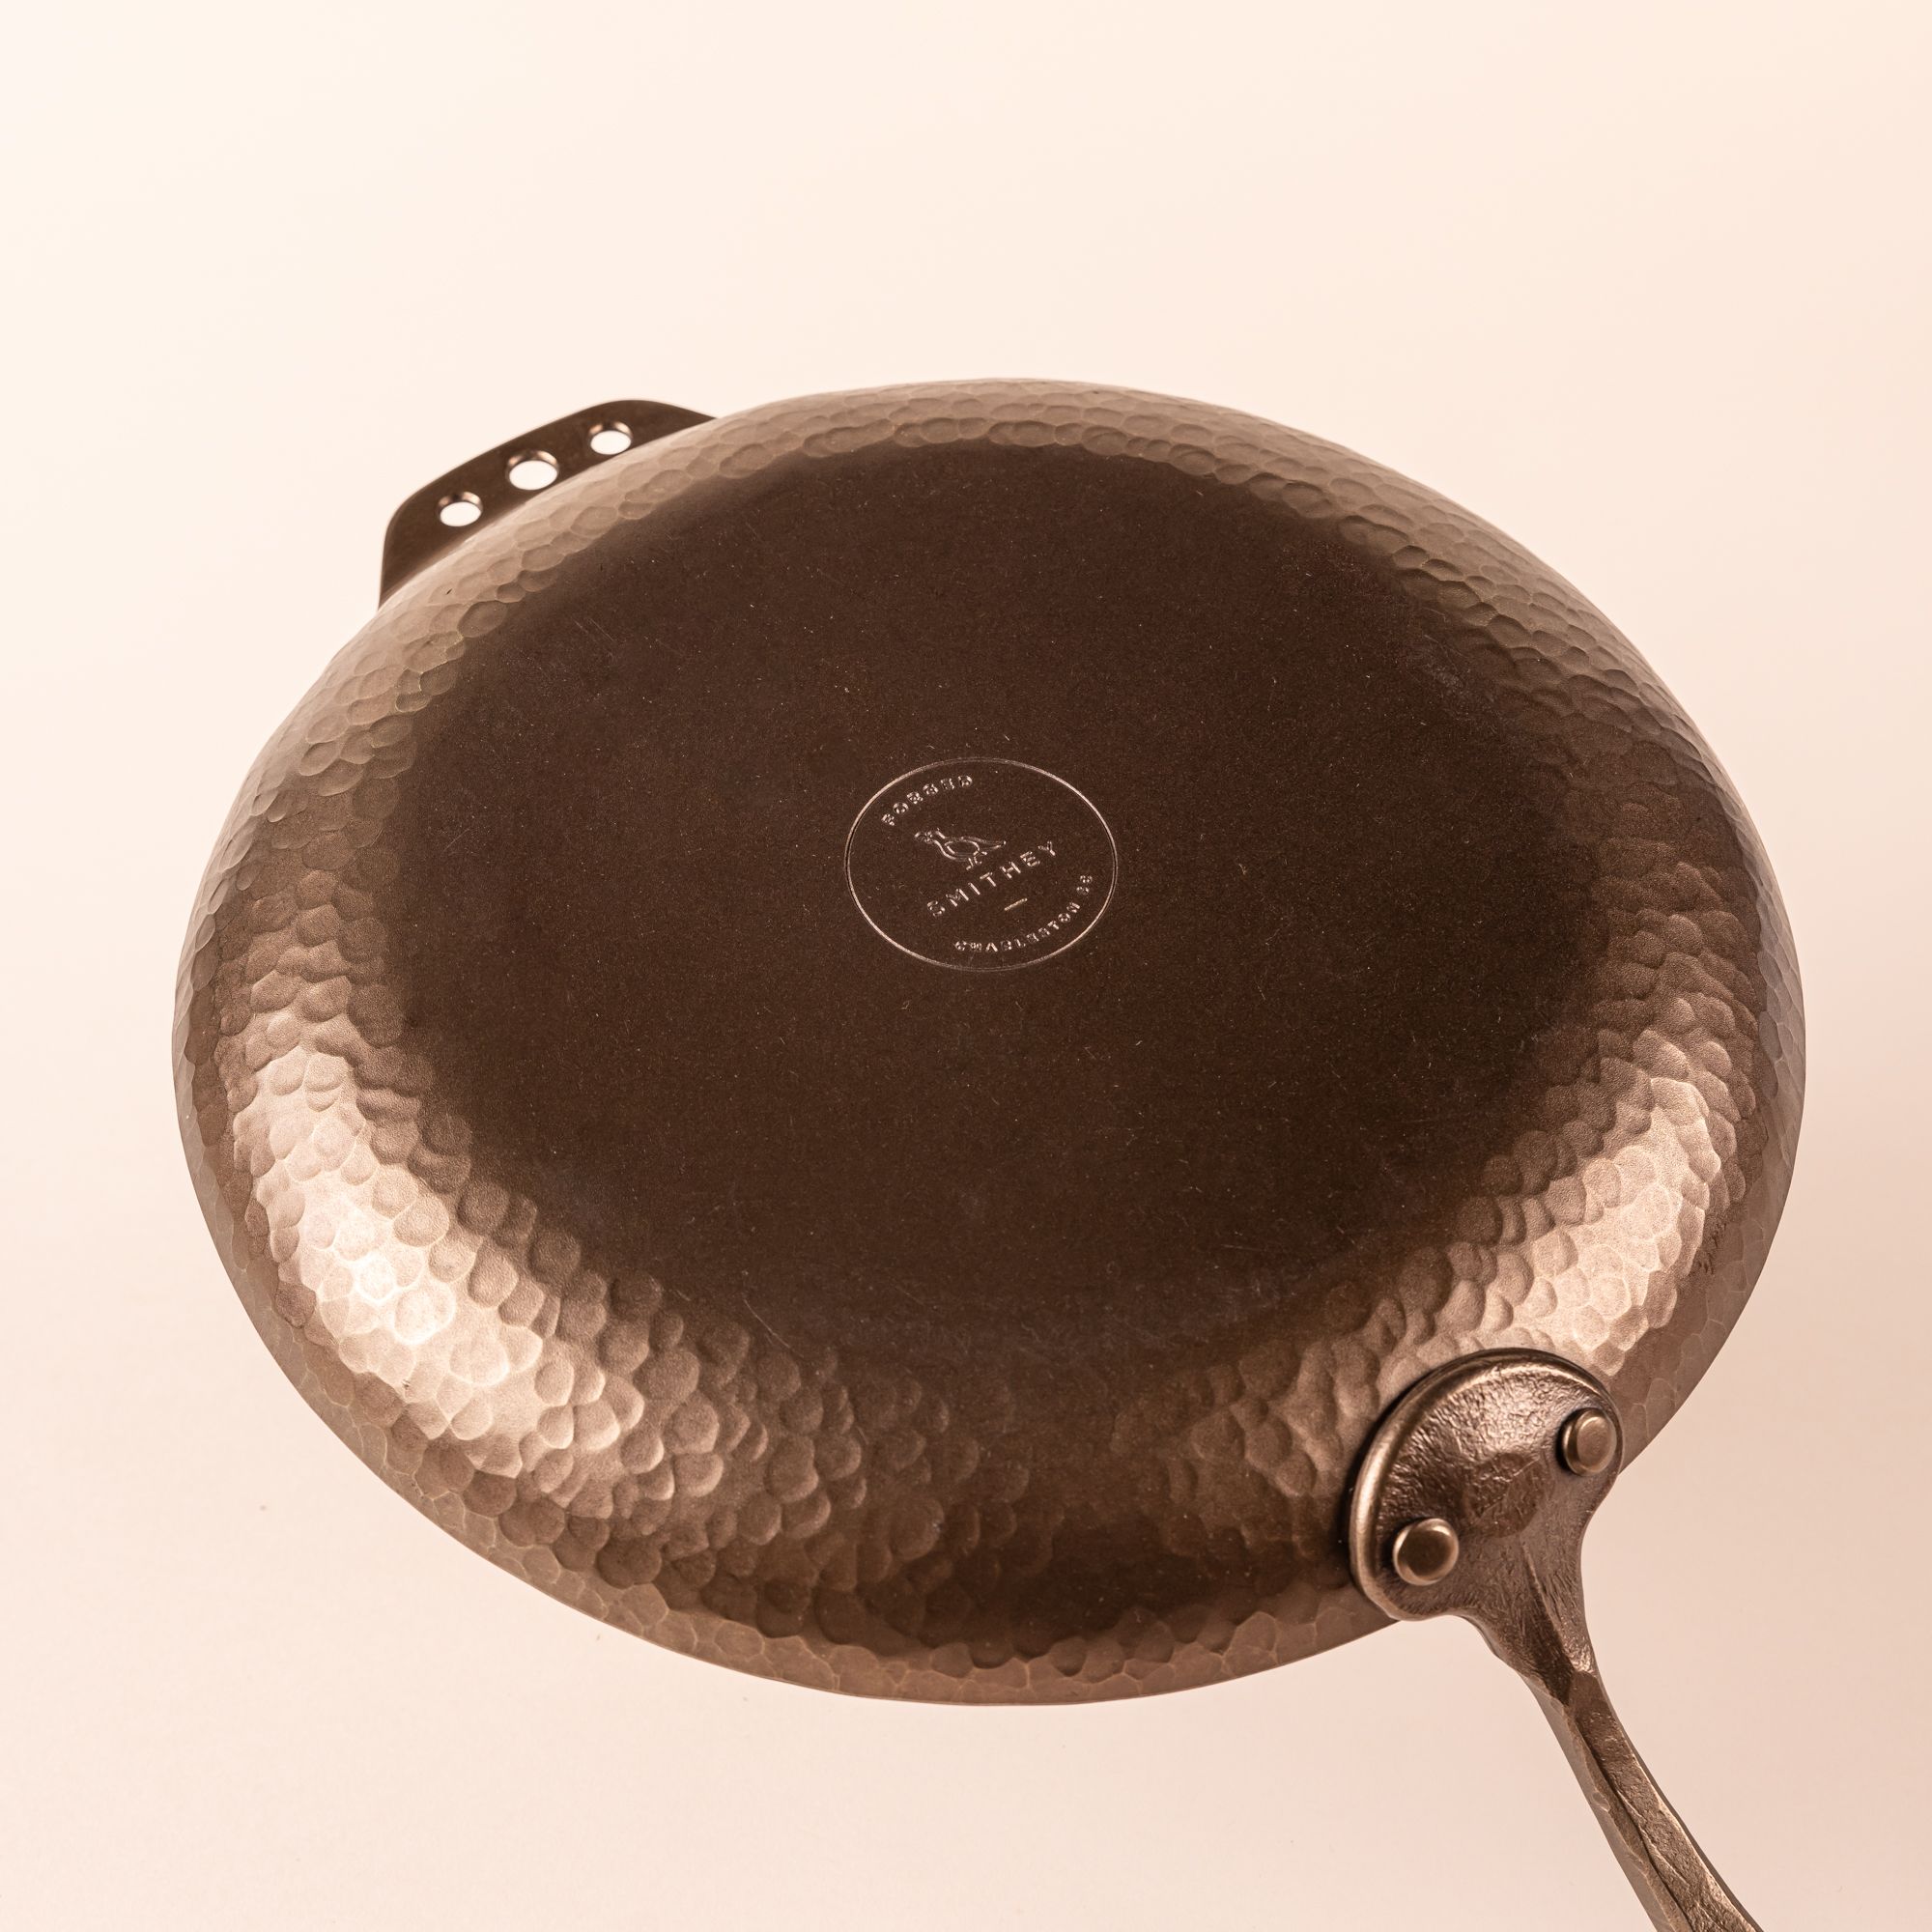 The bottom of a carbon steel farmhouse skillet with a hammered texture and hand forged design. The bottom features a stamp for the brand, Smithey.